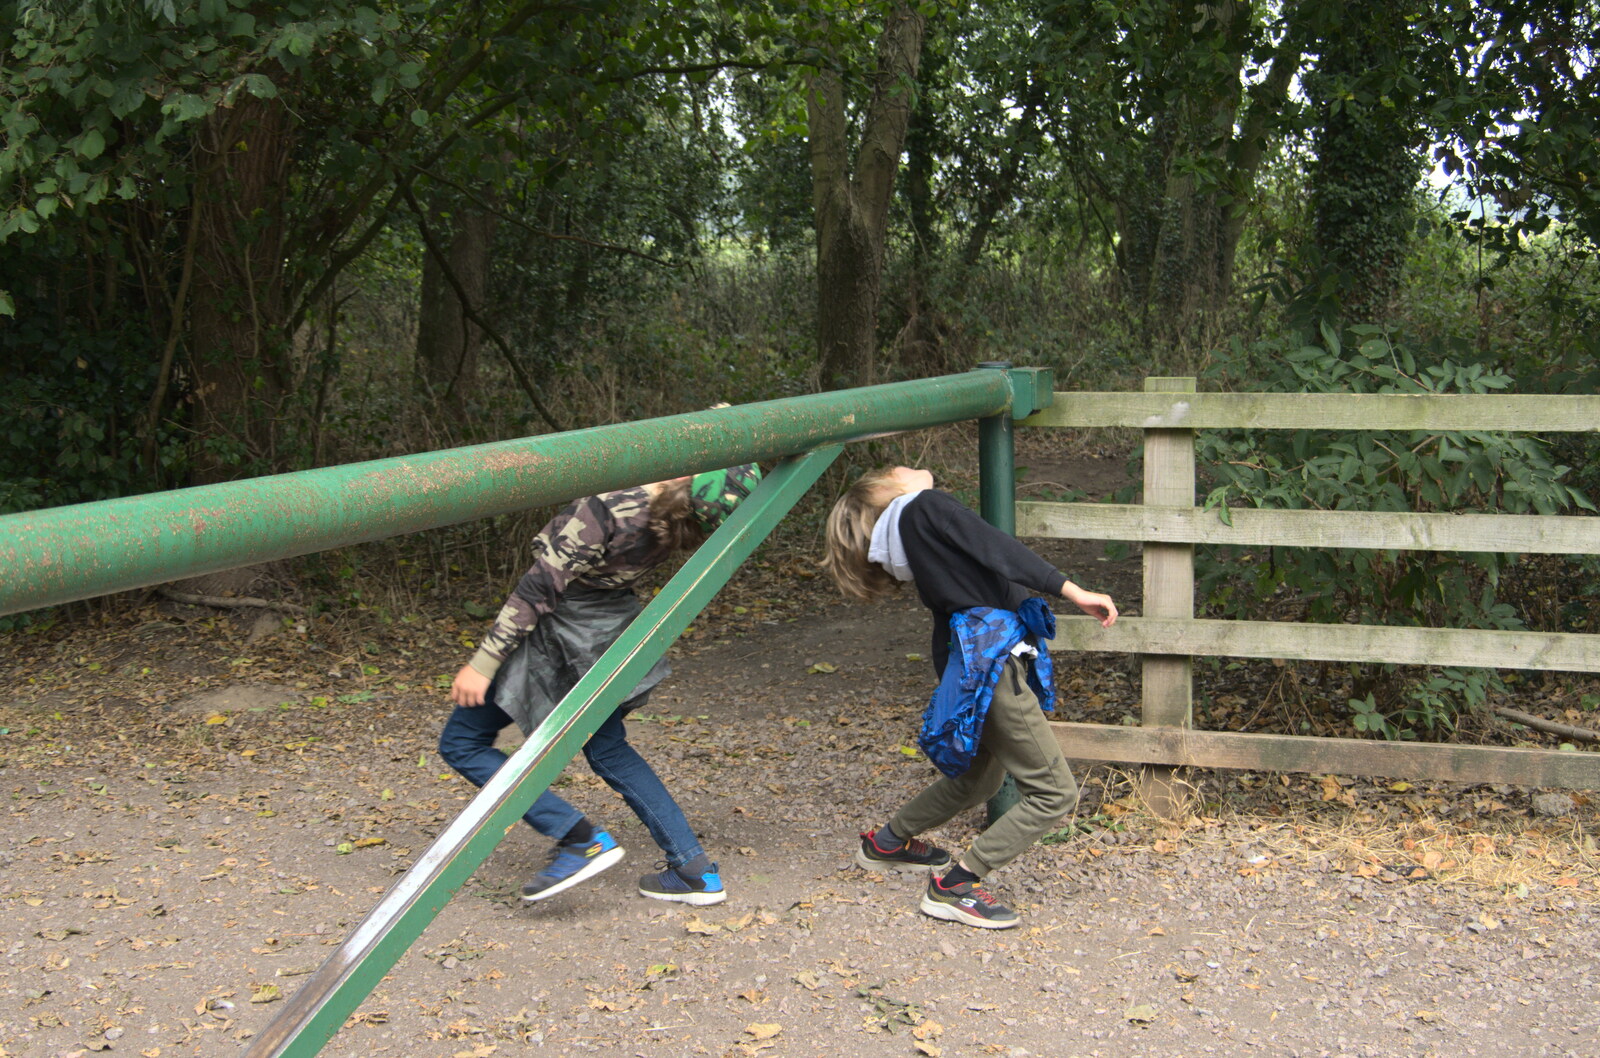 The boys limbo under a gate from Jules Visits, and a Trip to Tyrrel's Wood, Pulham Market, Norfolk - 16th August 2020